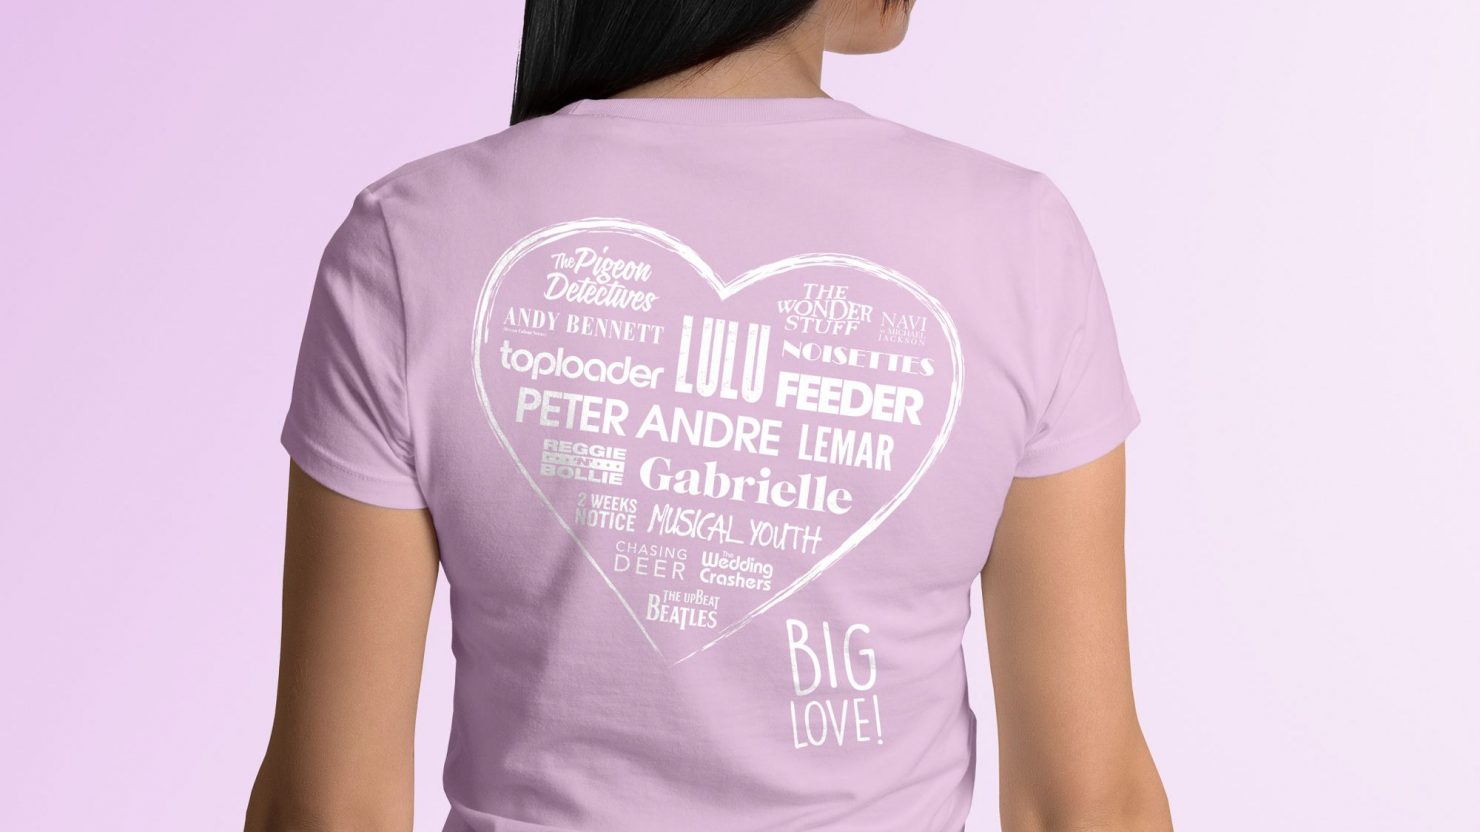 Pink branded t-shirt design for Solihull Summerfest music festival with Peter Andre Feeder and Toploader